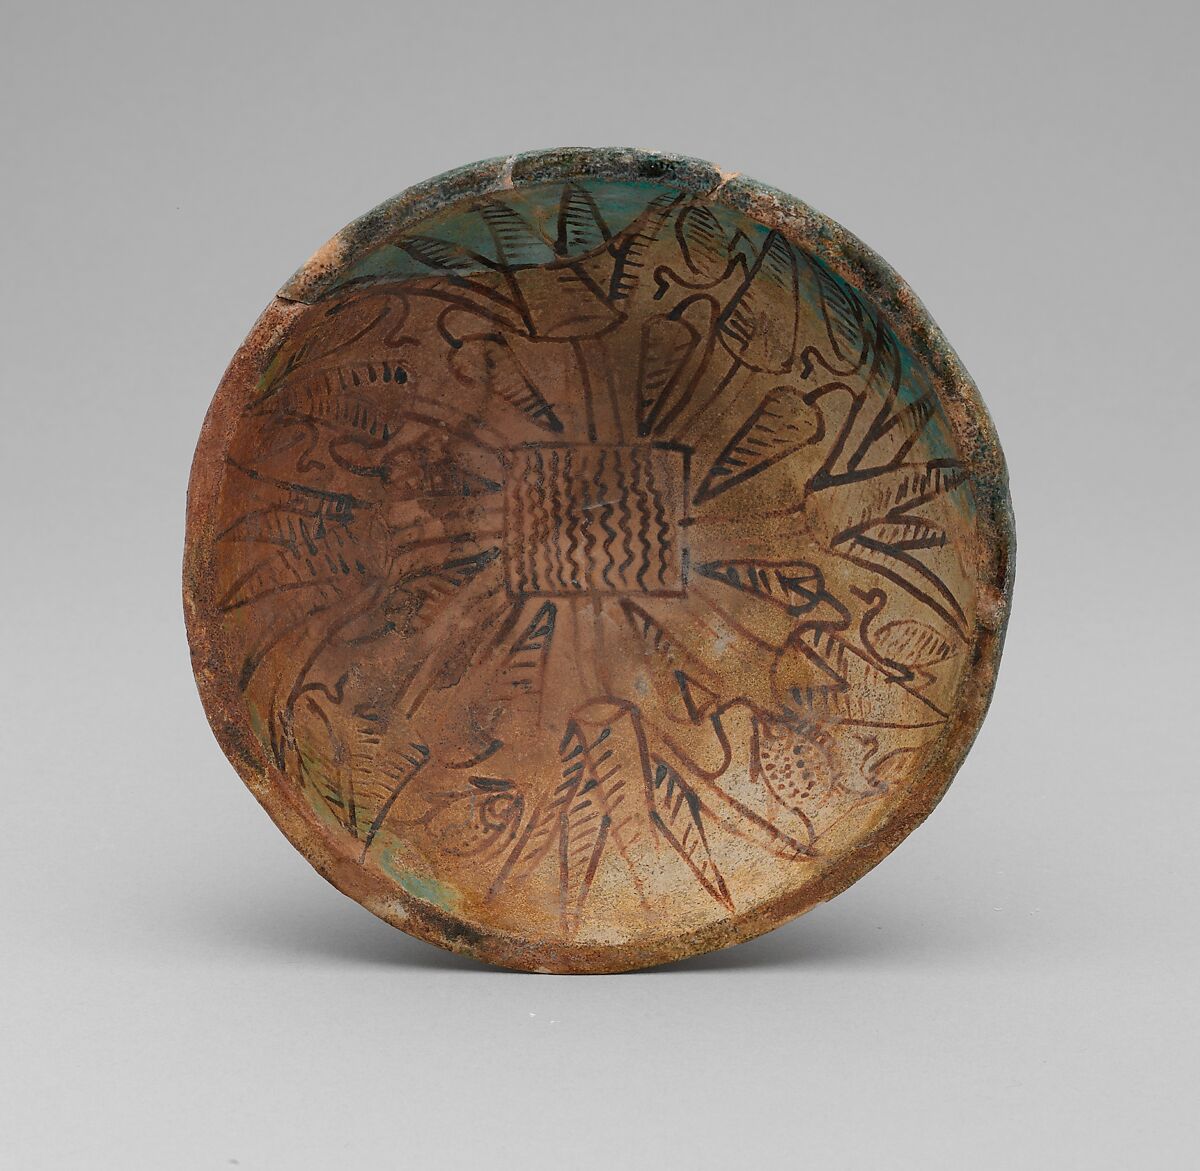 Marsh-Bowl of Rennefer, Faience, paint 